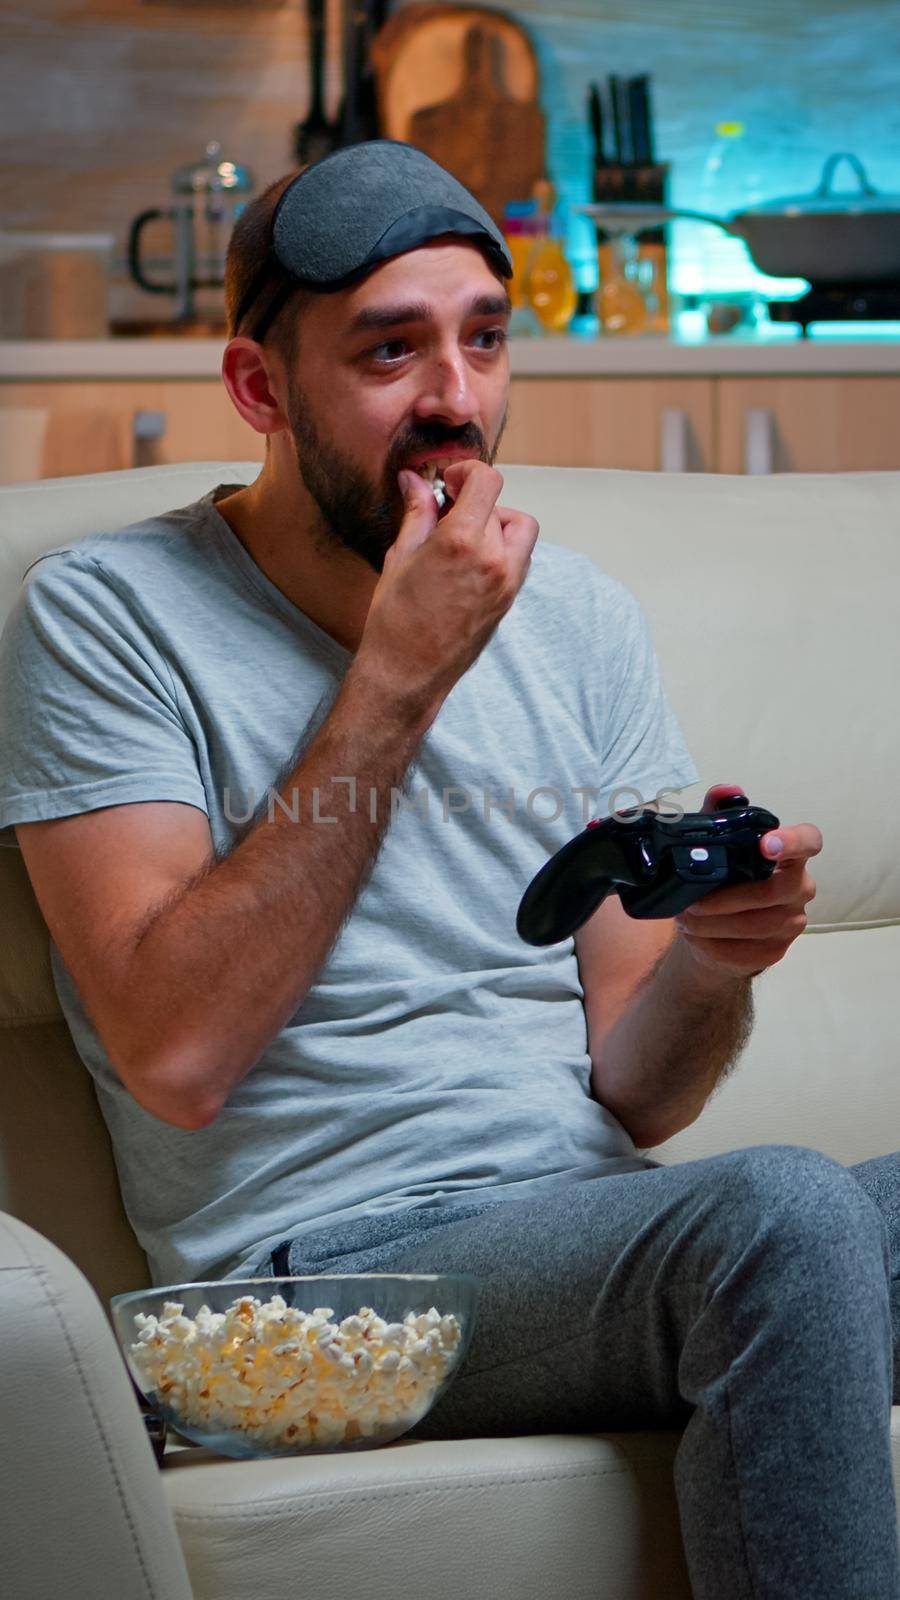 Upset pro gamer sitting on couch and playing soccer videogames by DCStudio